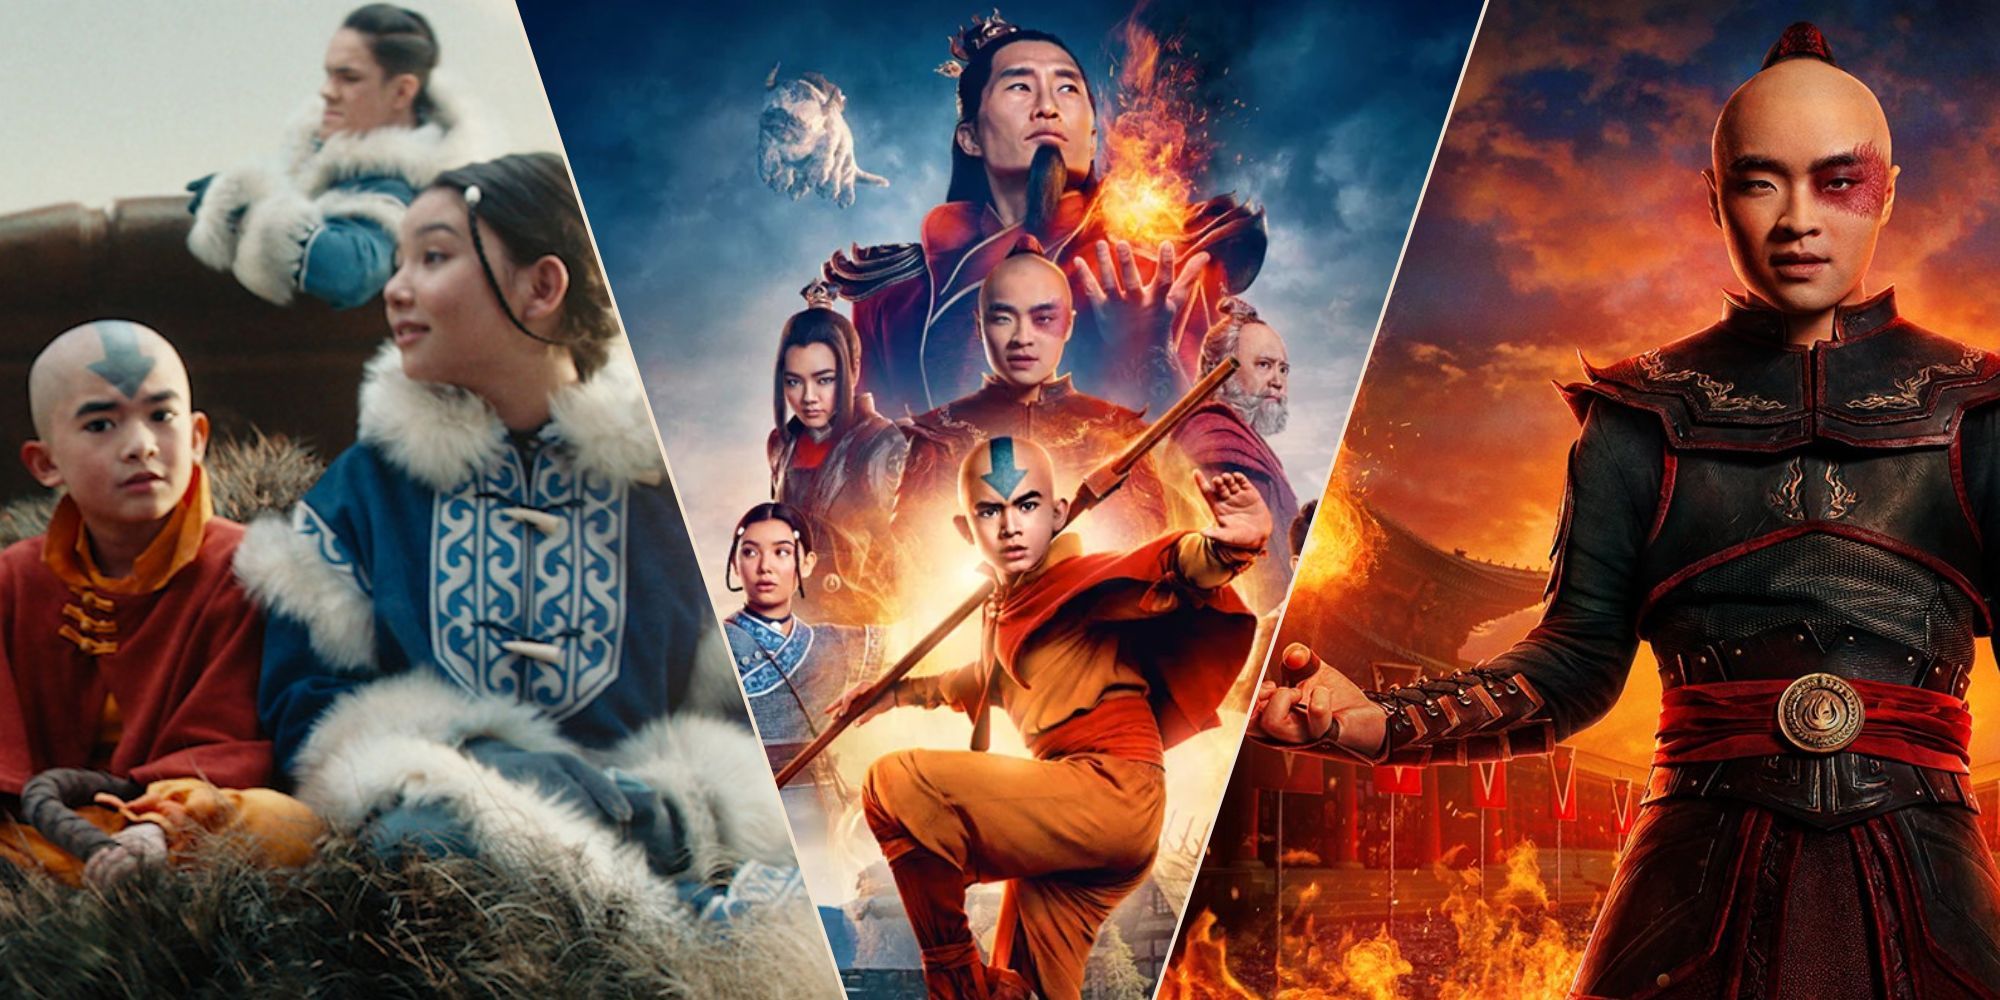 Scenes and posters from Netflix's Live Action Avatar series